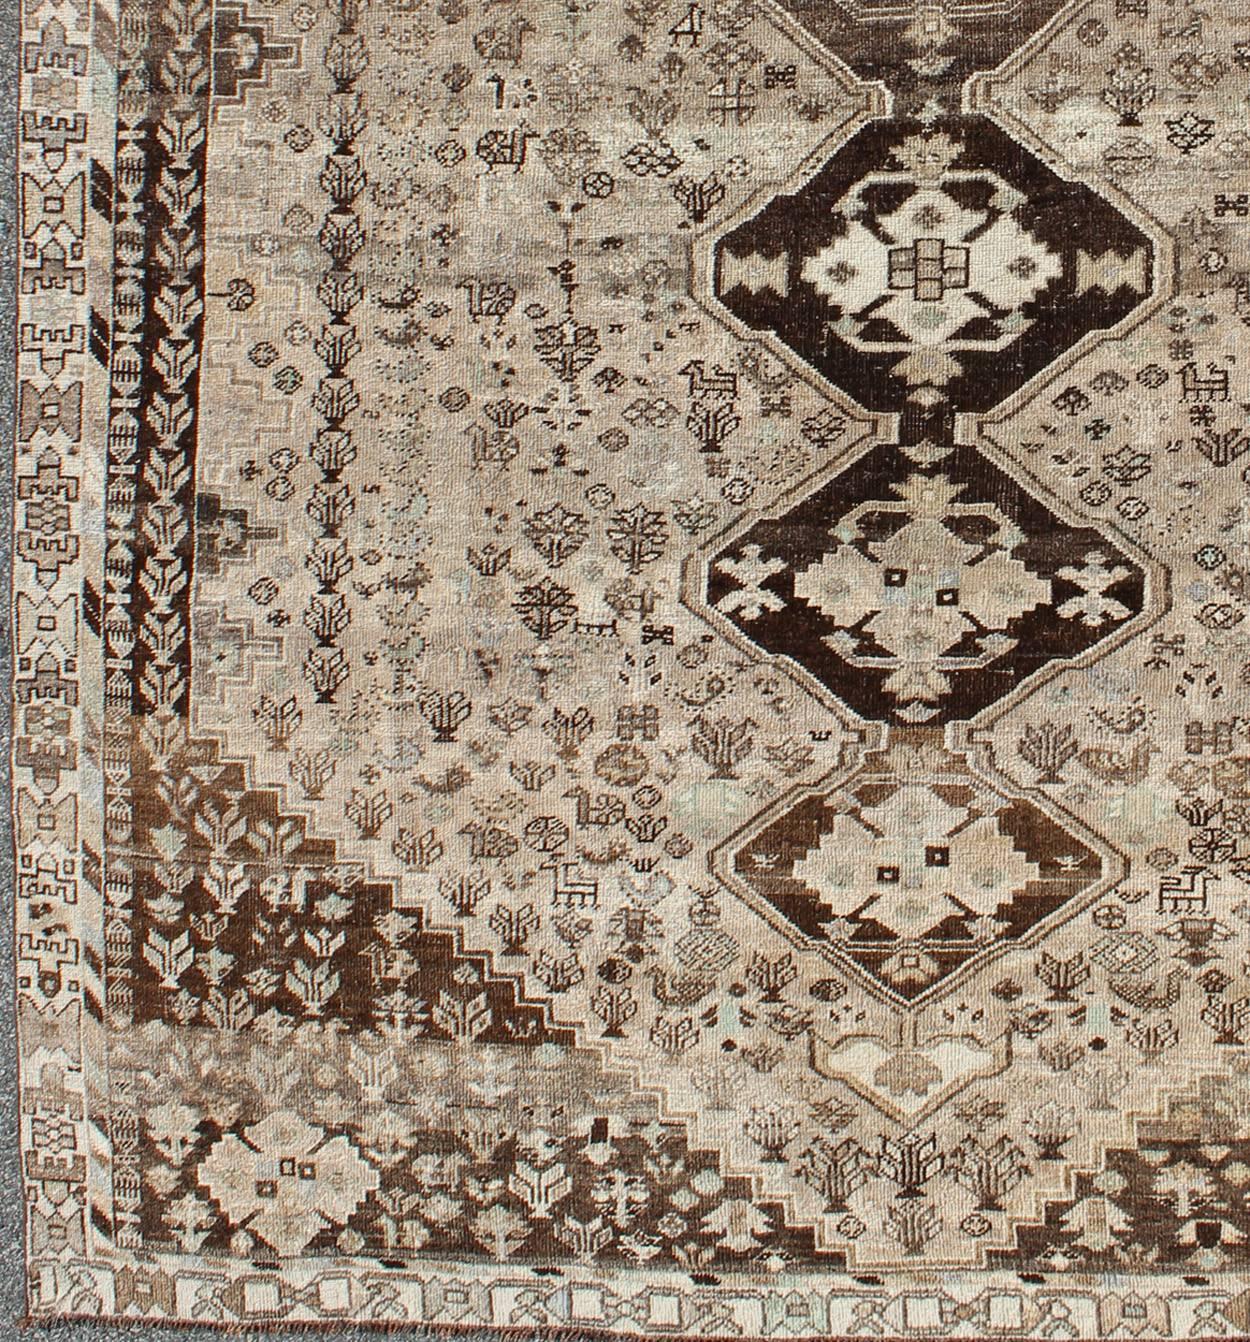 Brown/Taupe Vintage Persian Shiraz rug with Vertical Sub-Geometric Medallions, rug DSP-A342934, country of origin / type: Iran / Shiraz, circa 1950

This vintage Persian Shiraz rug (circa 1950) features a unique blend of colors and an intricately